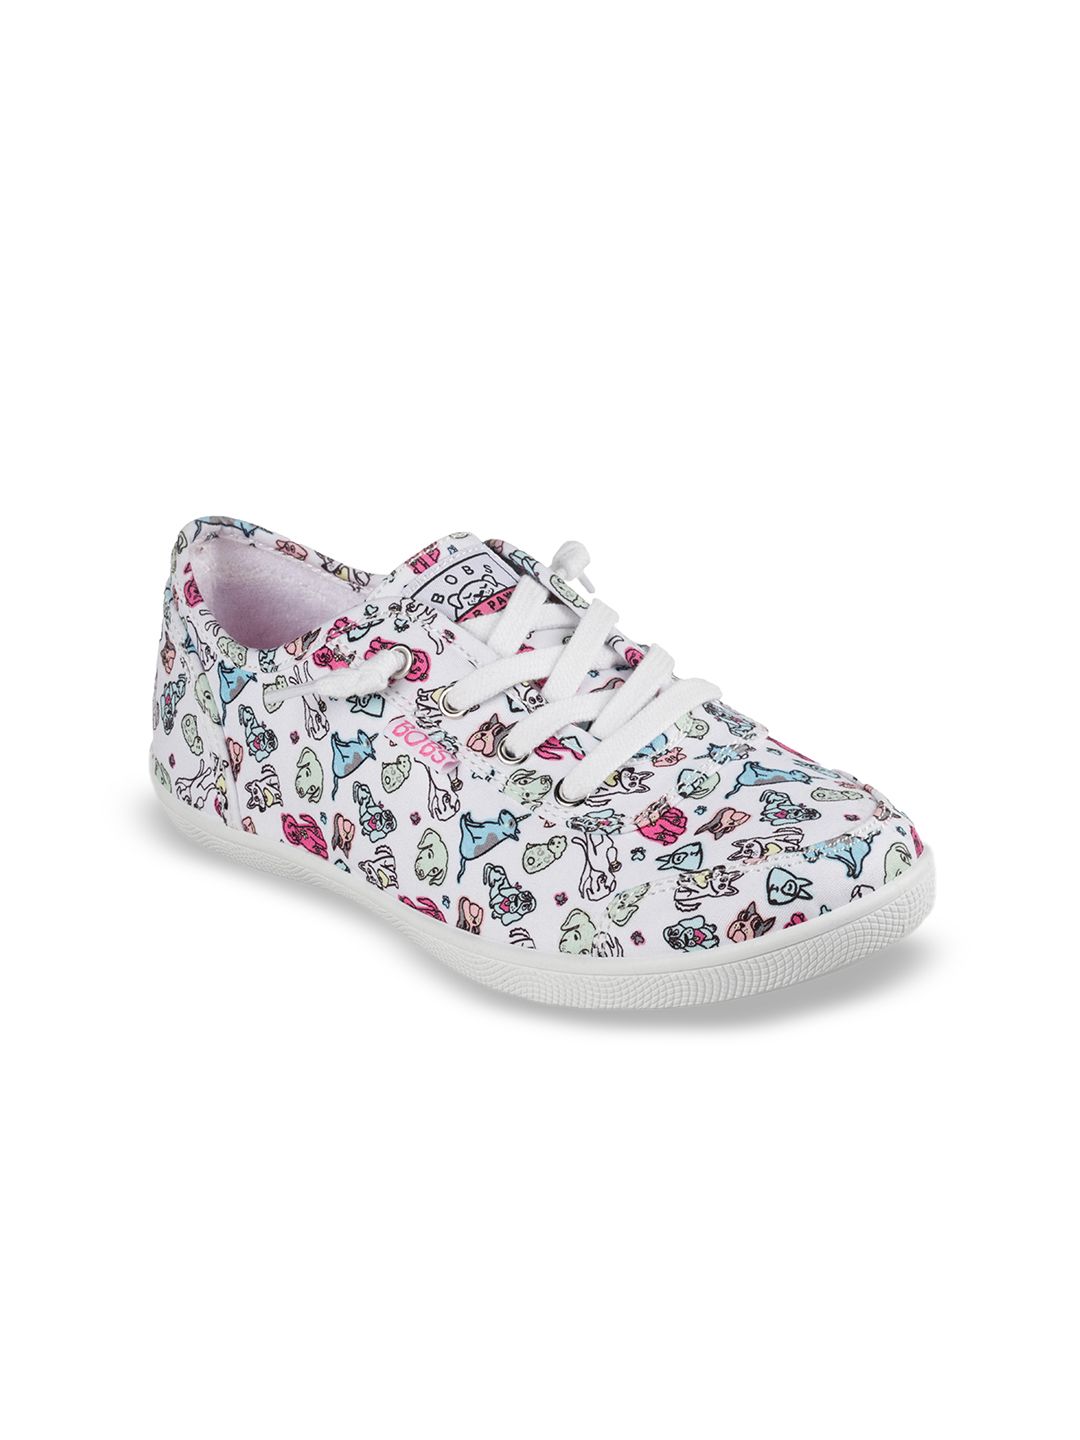 Skechers Women White Printed Leather Sneakers Price in India